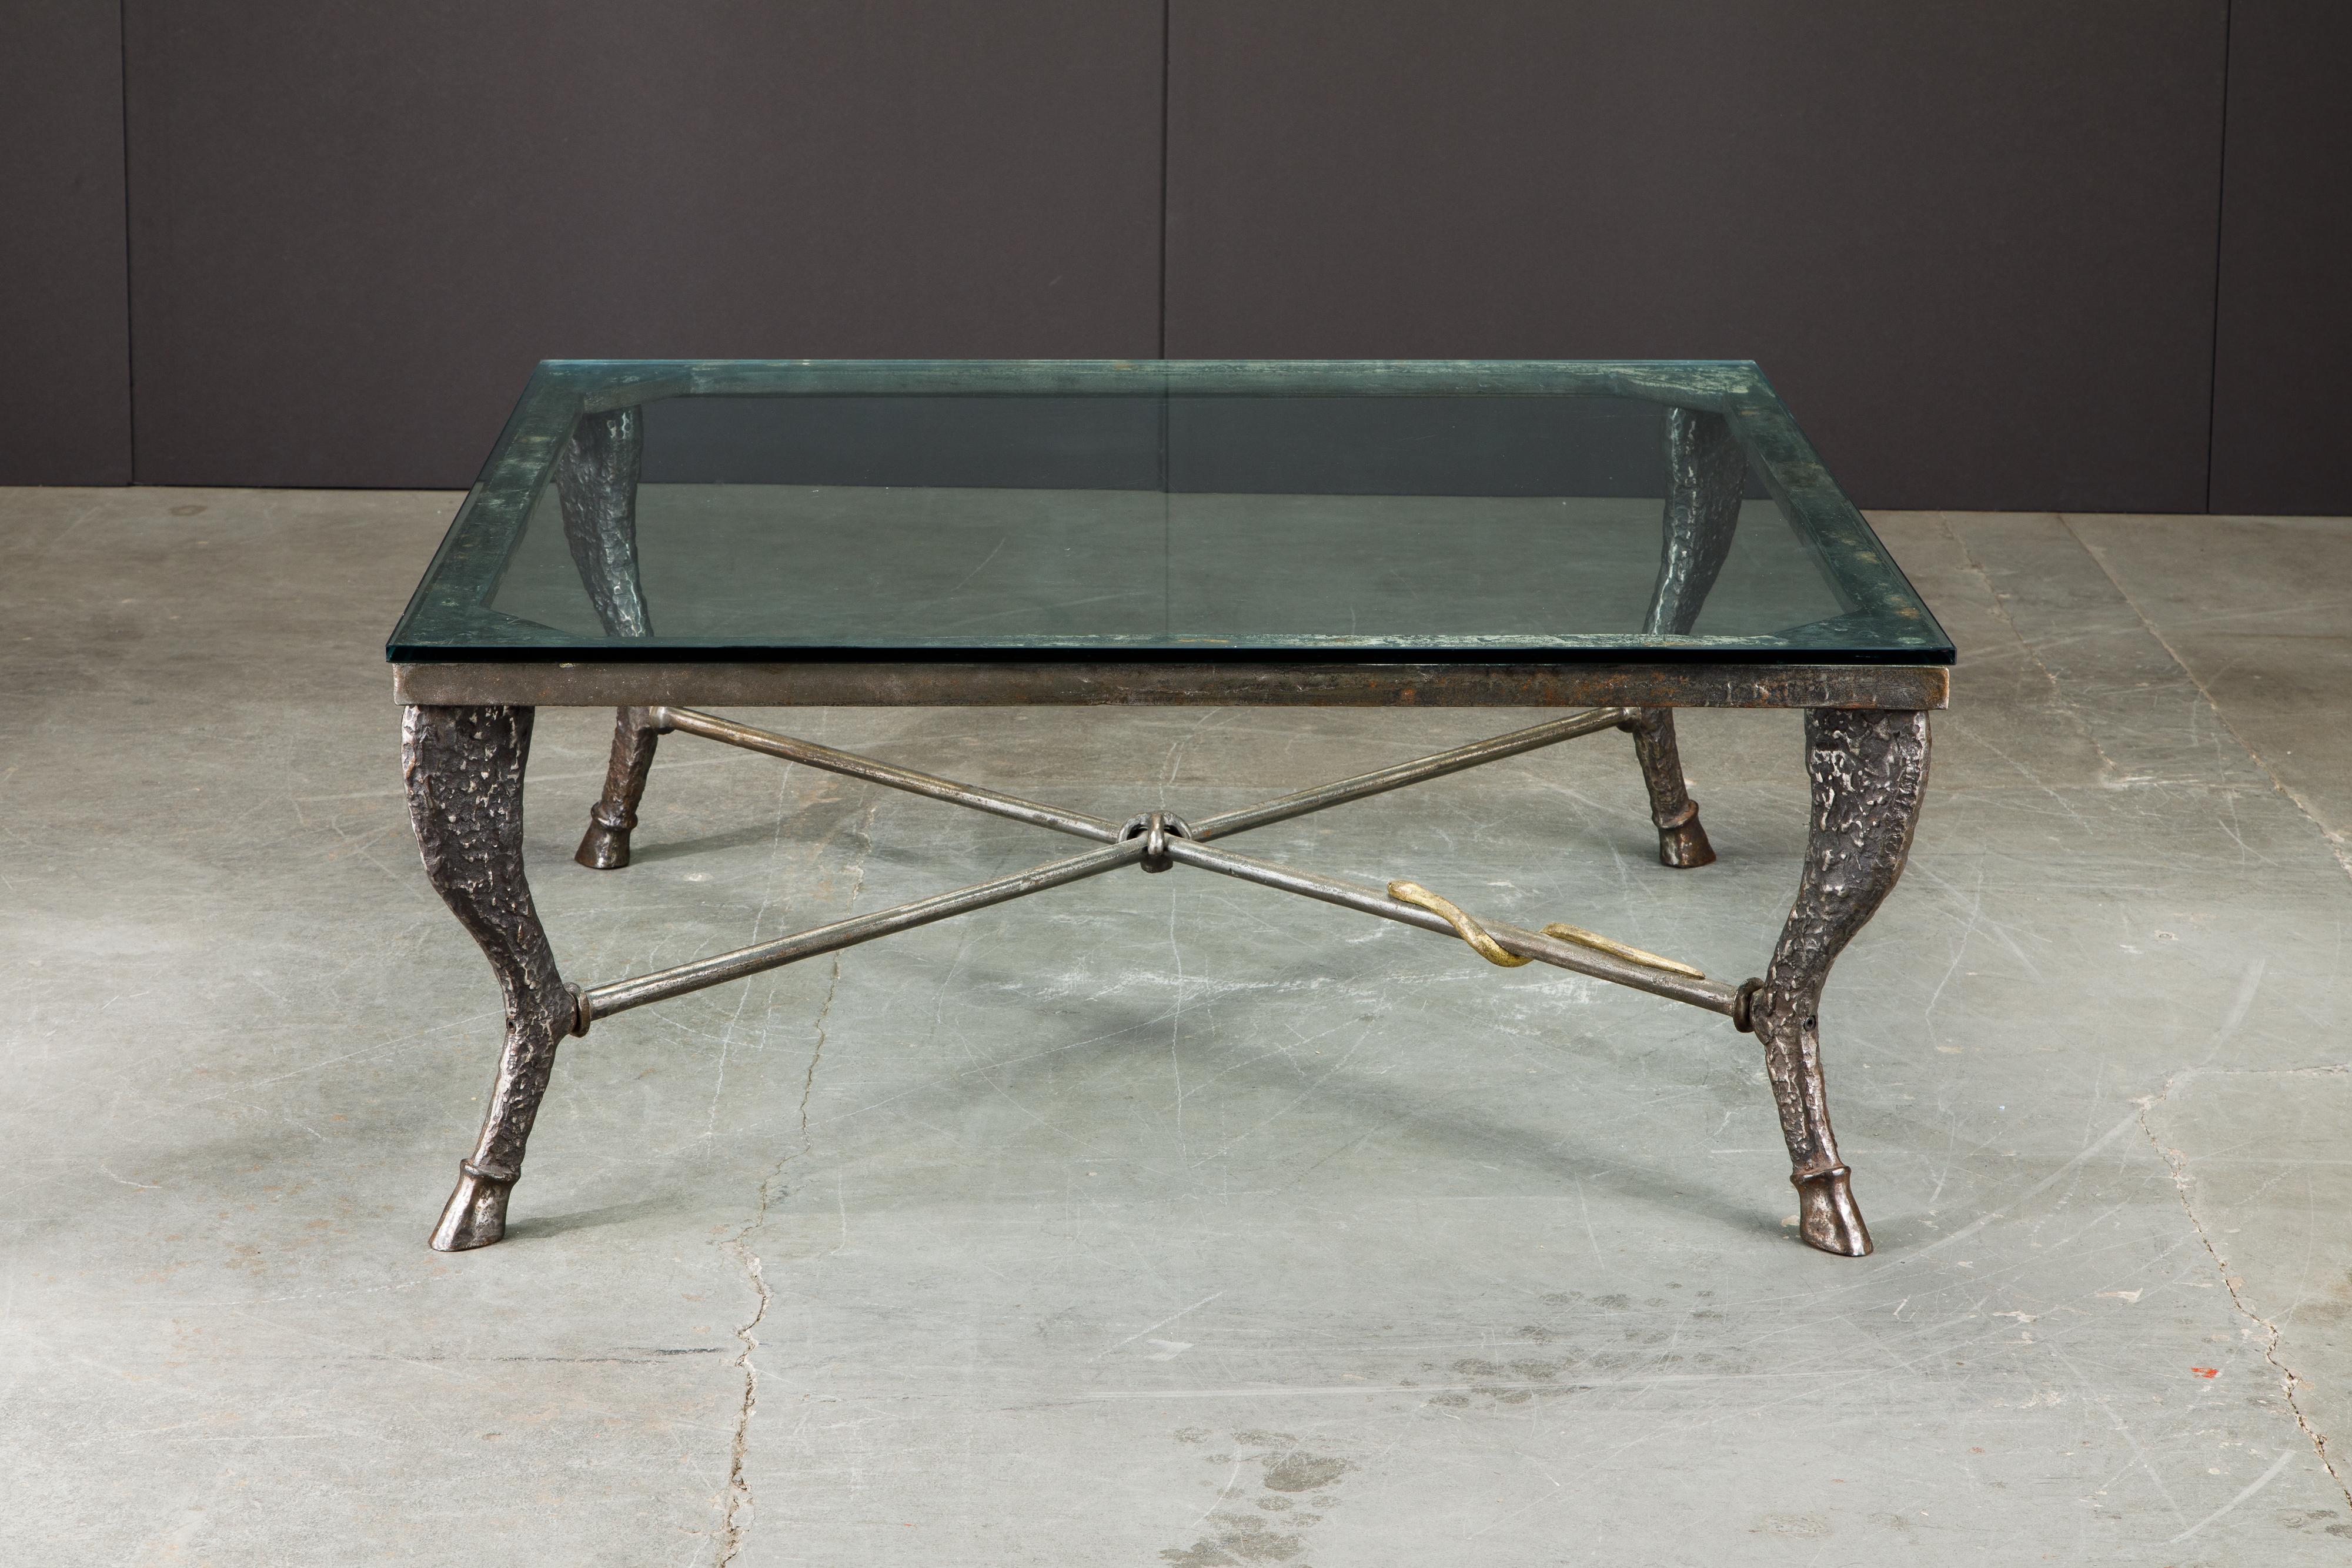 Brutalist Bronze 'Etruscan' Coffee Table Attributed to Christopher Chodoff,  c. 1984